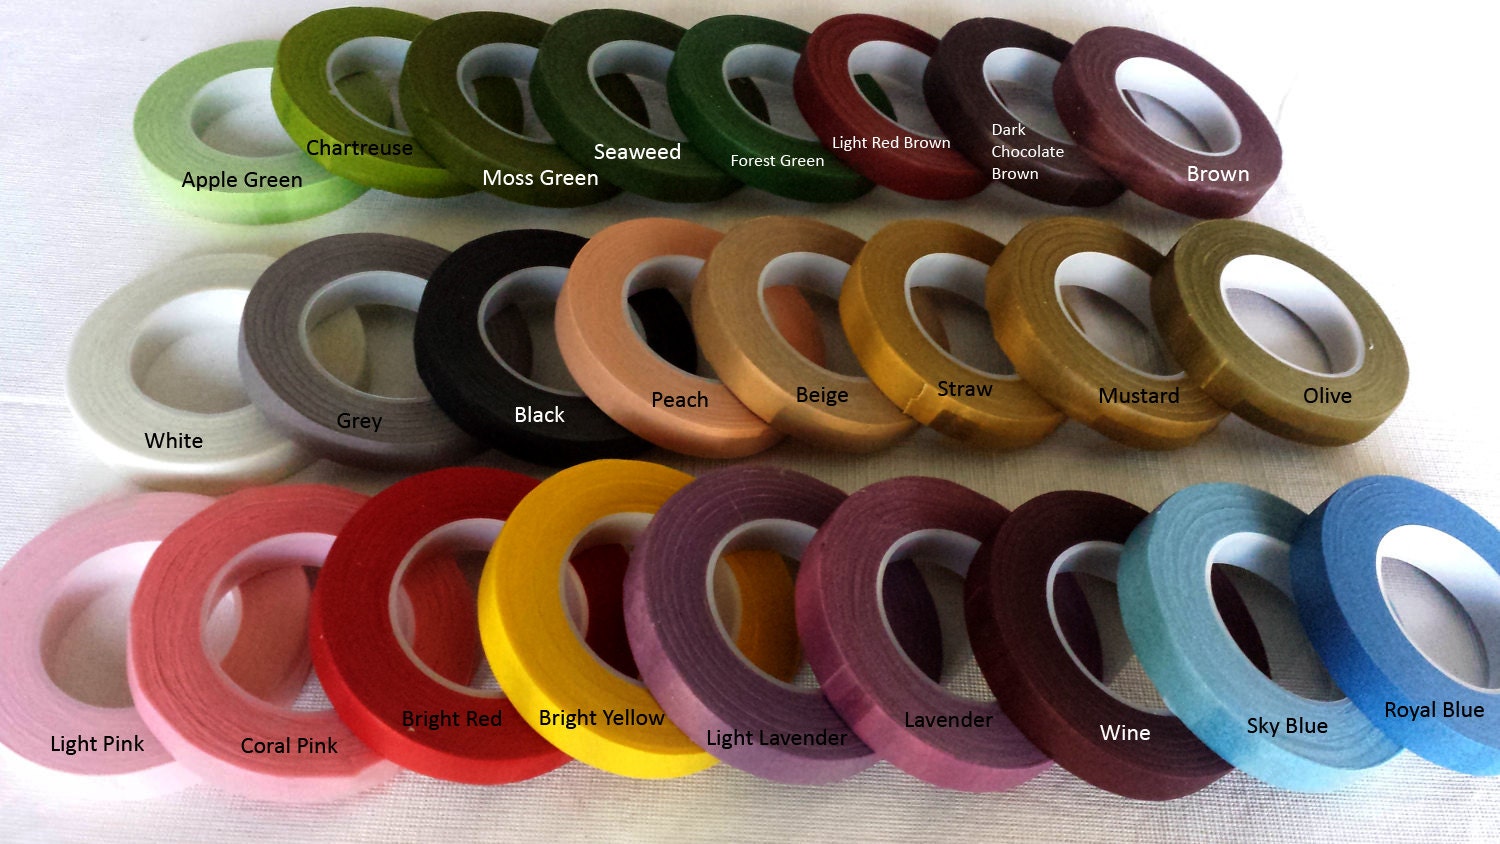 1 Roll of Floral Tape 34 Yards 30 M/per Roll 13 Colors 